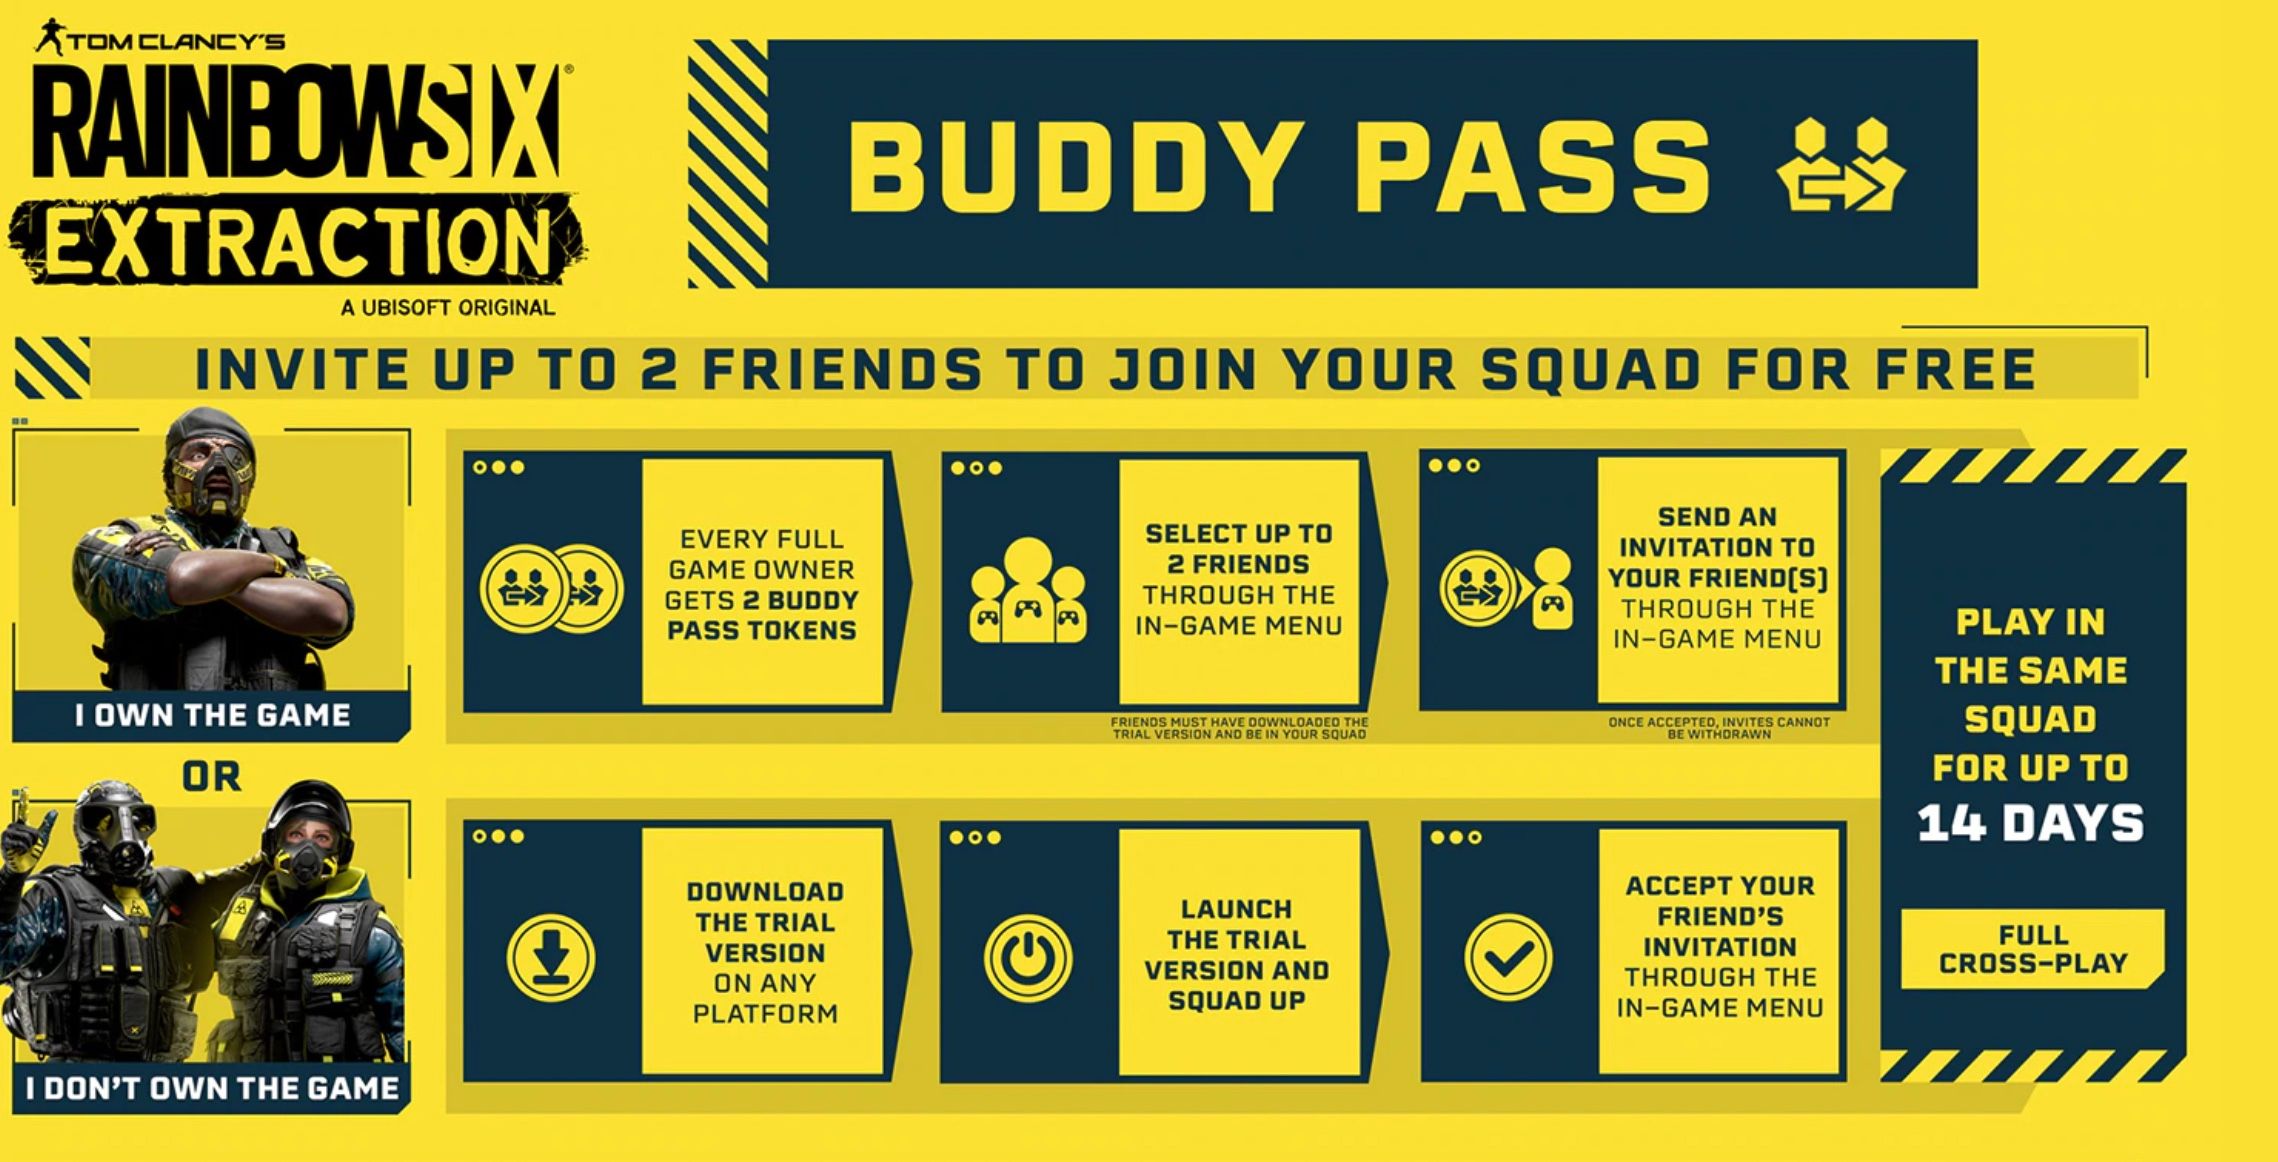 buddy pass rainbow six extraction details explainer